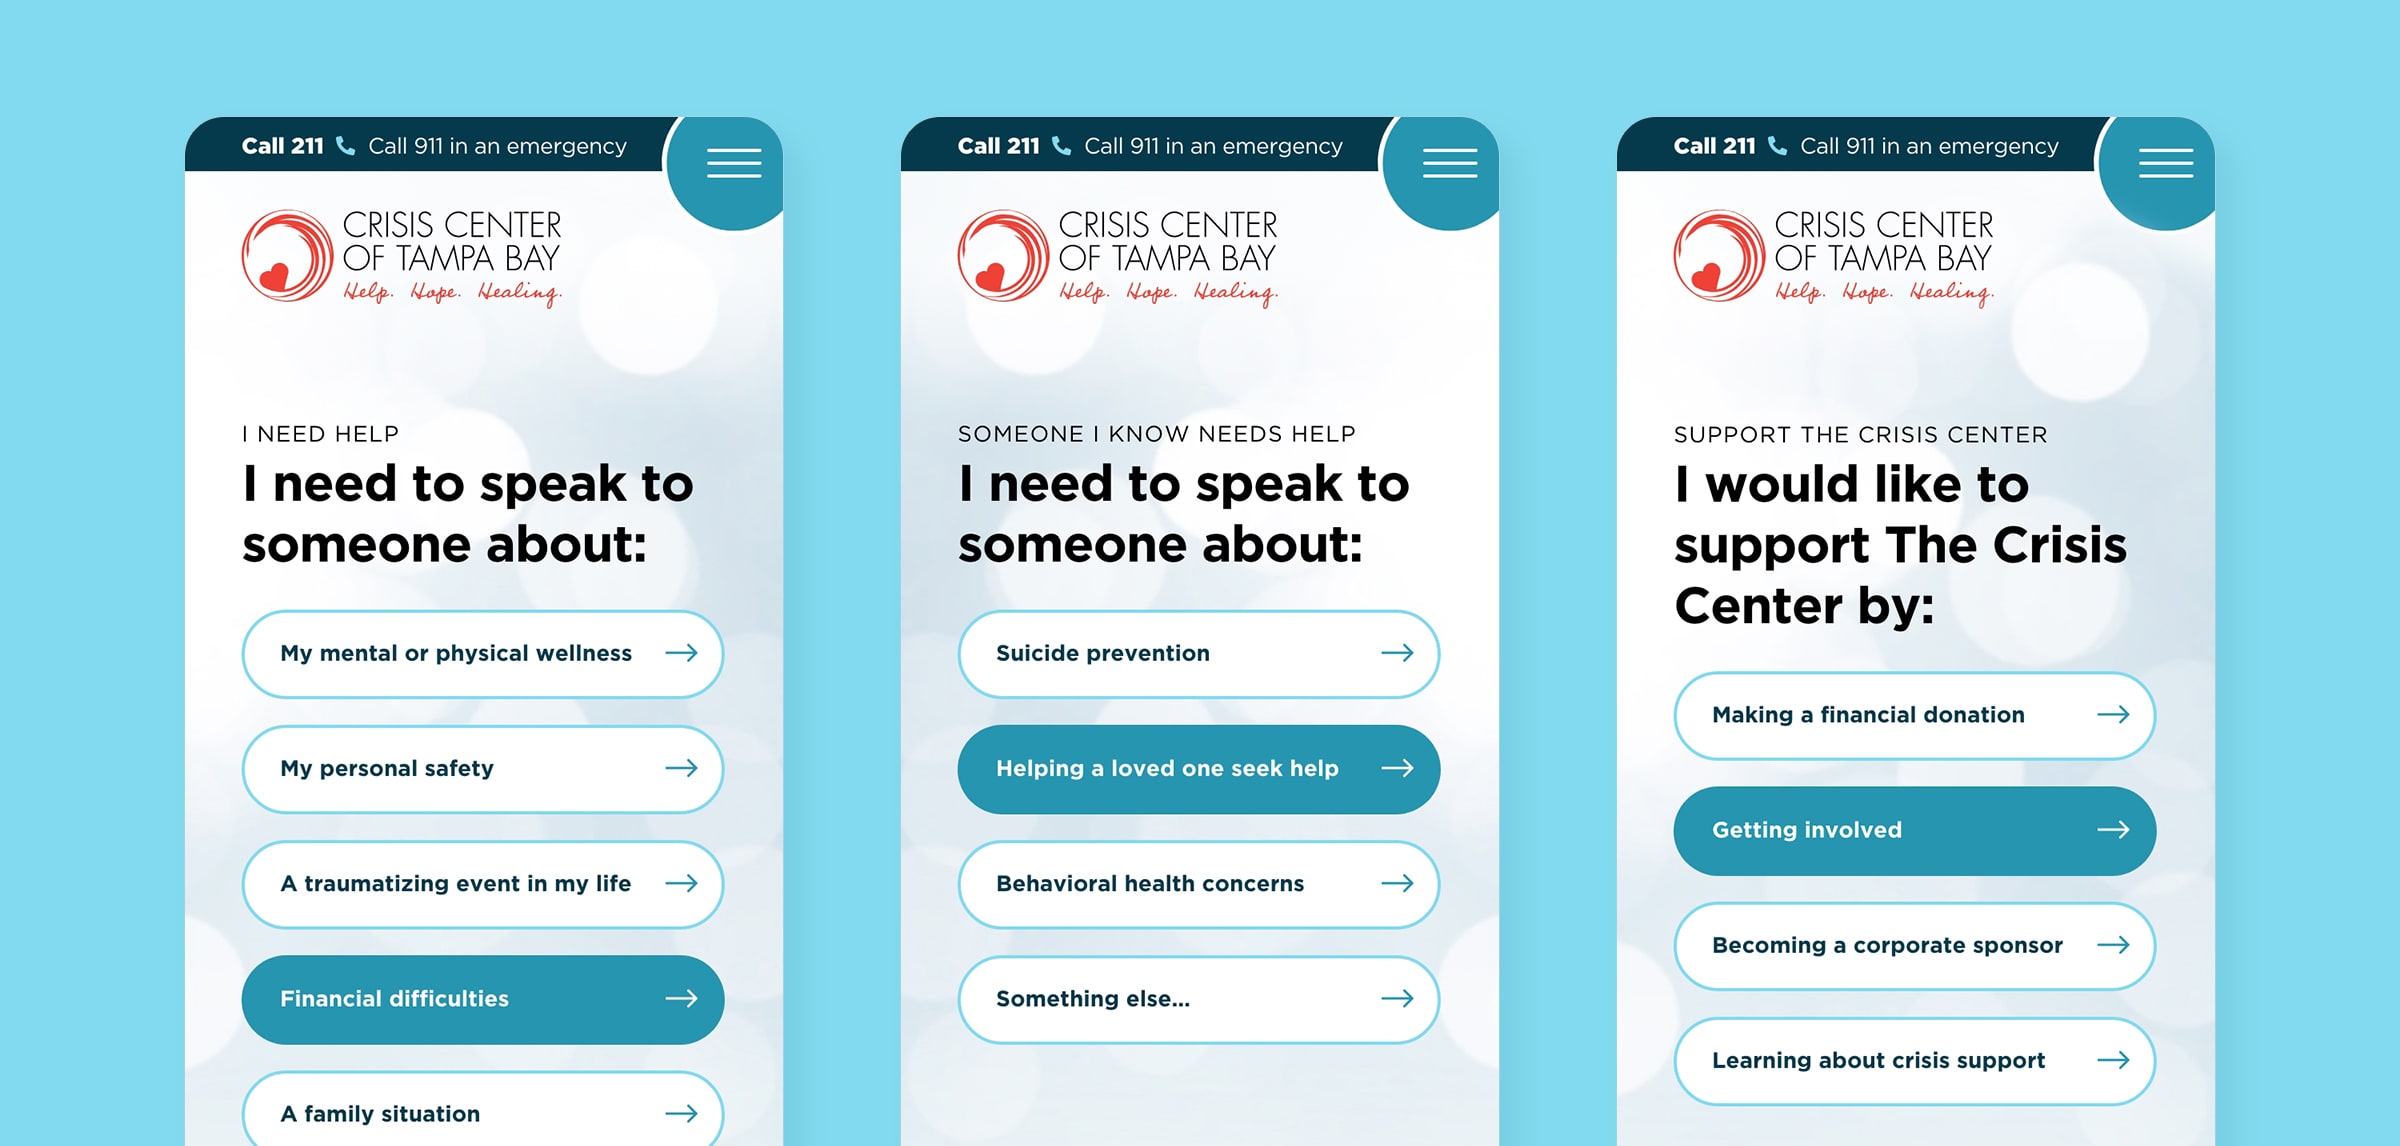 Pages of the Crisis Center website that guide a user to find help, help someone they know, or support the organization